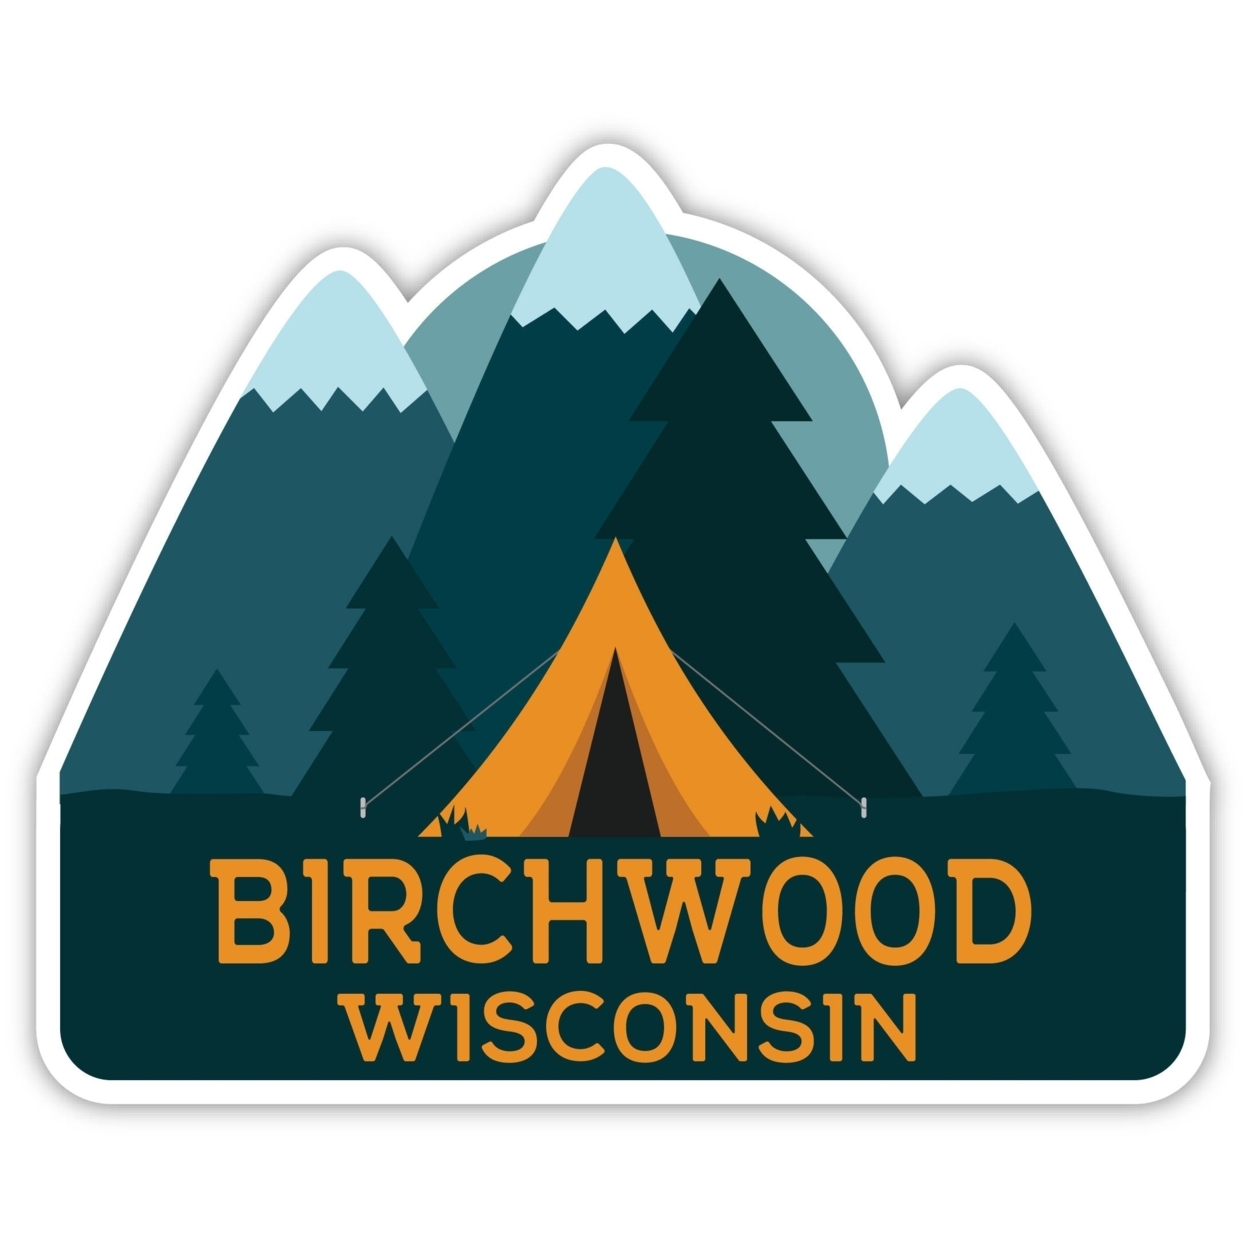 Birchwood Wisconsin Souvenir Decorative Stickers (Choose Theme And Size) - 4-Pack, 12-Inch, Tent